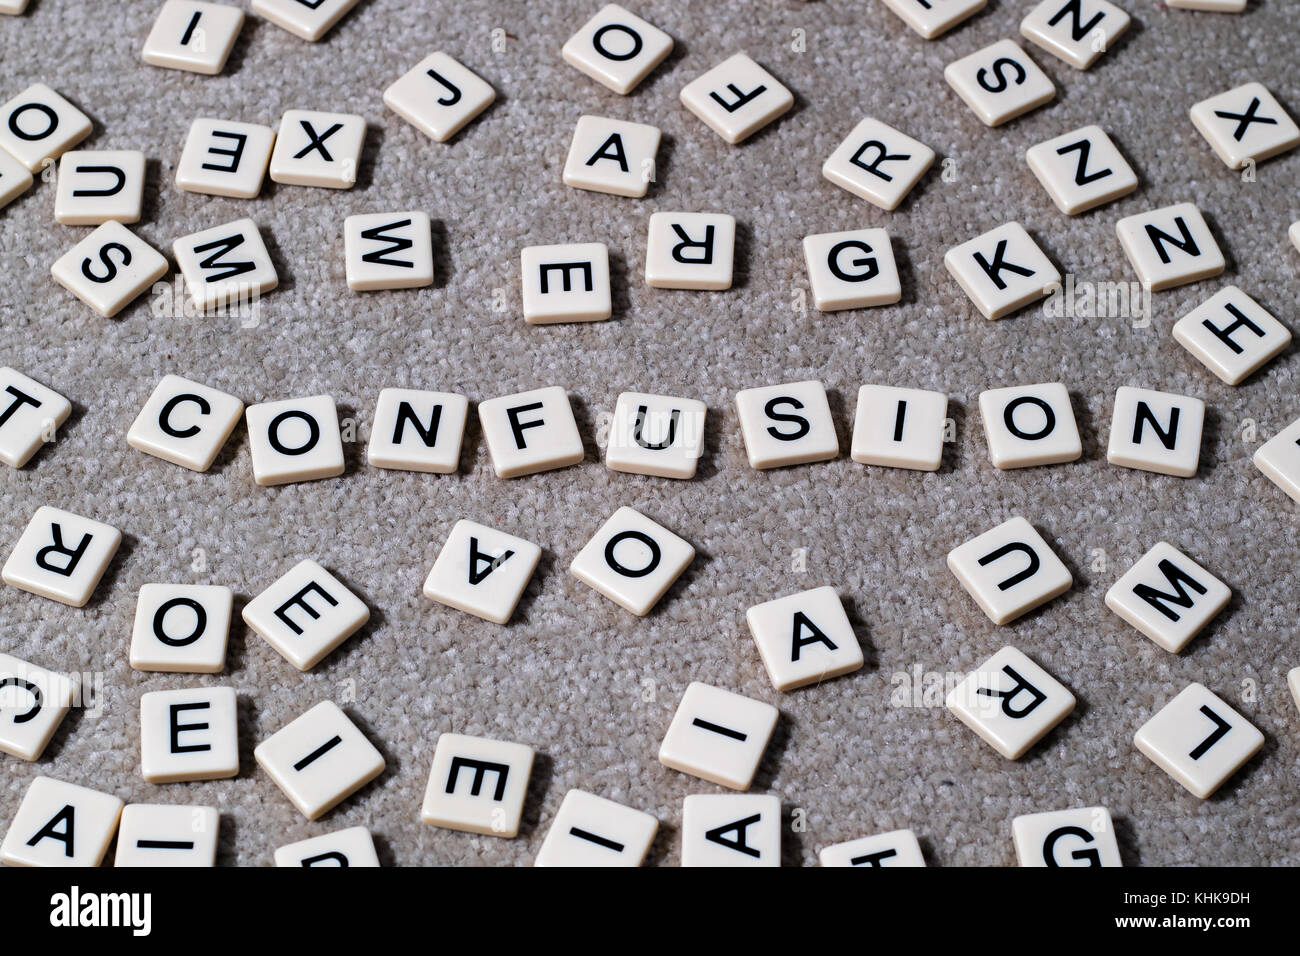 Confusion spelled out on scrabble style lettered tiles amongst a jumble of other letters. Stock Photo